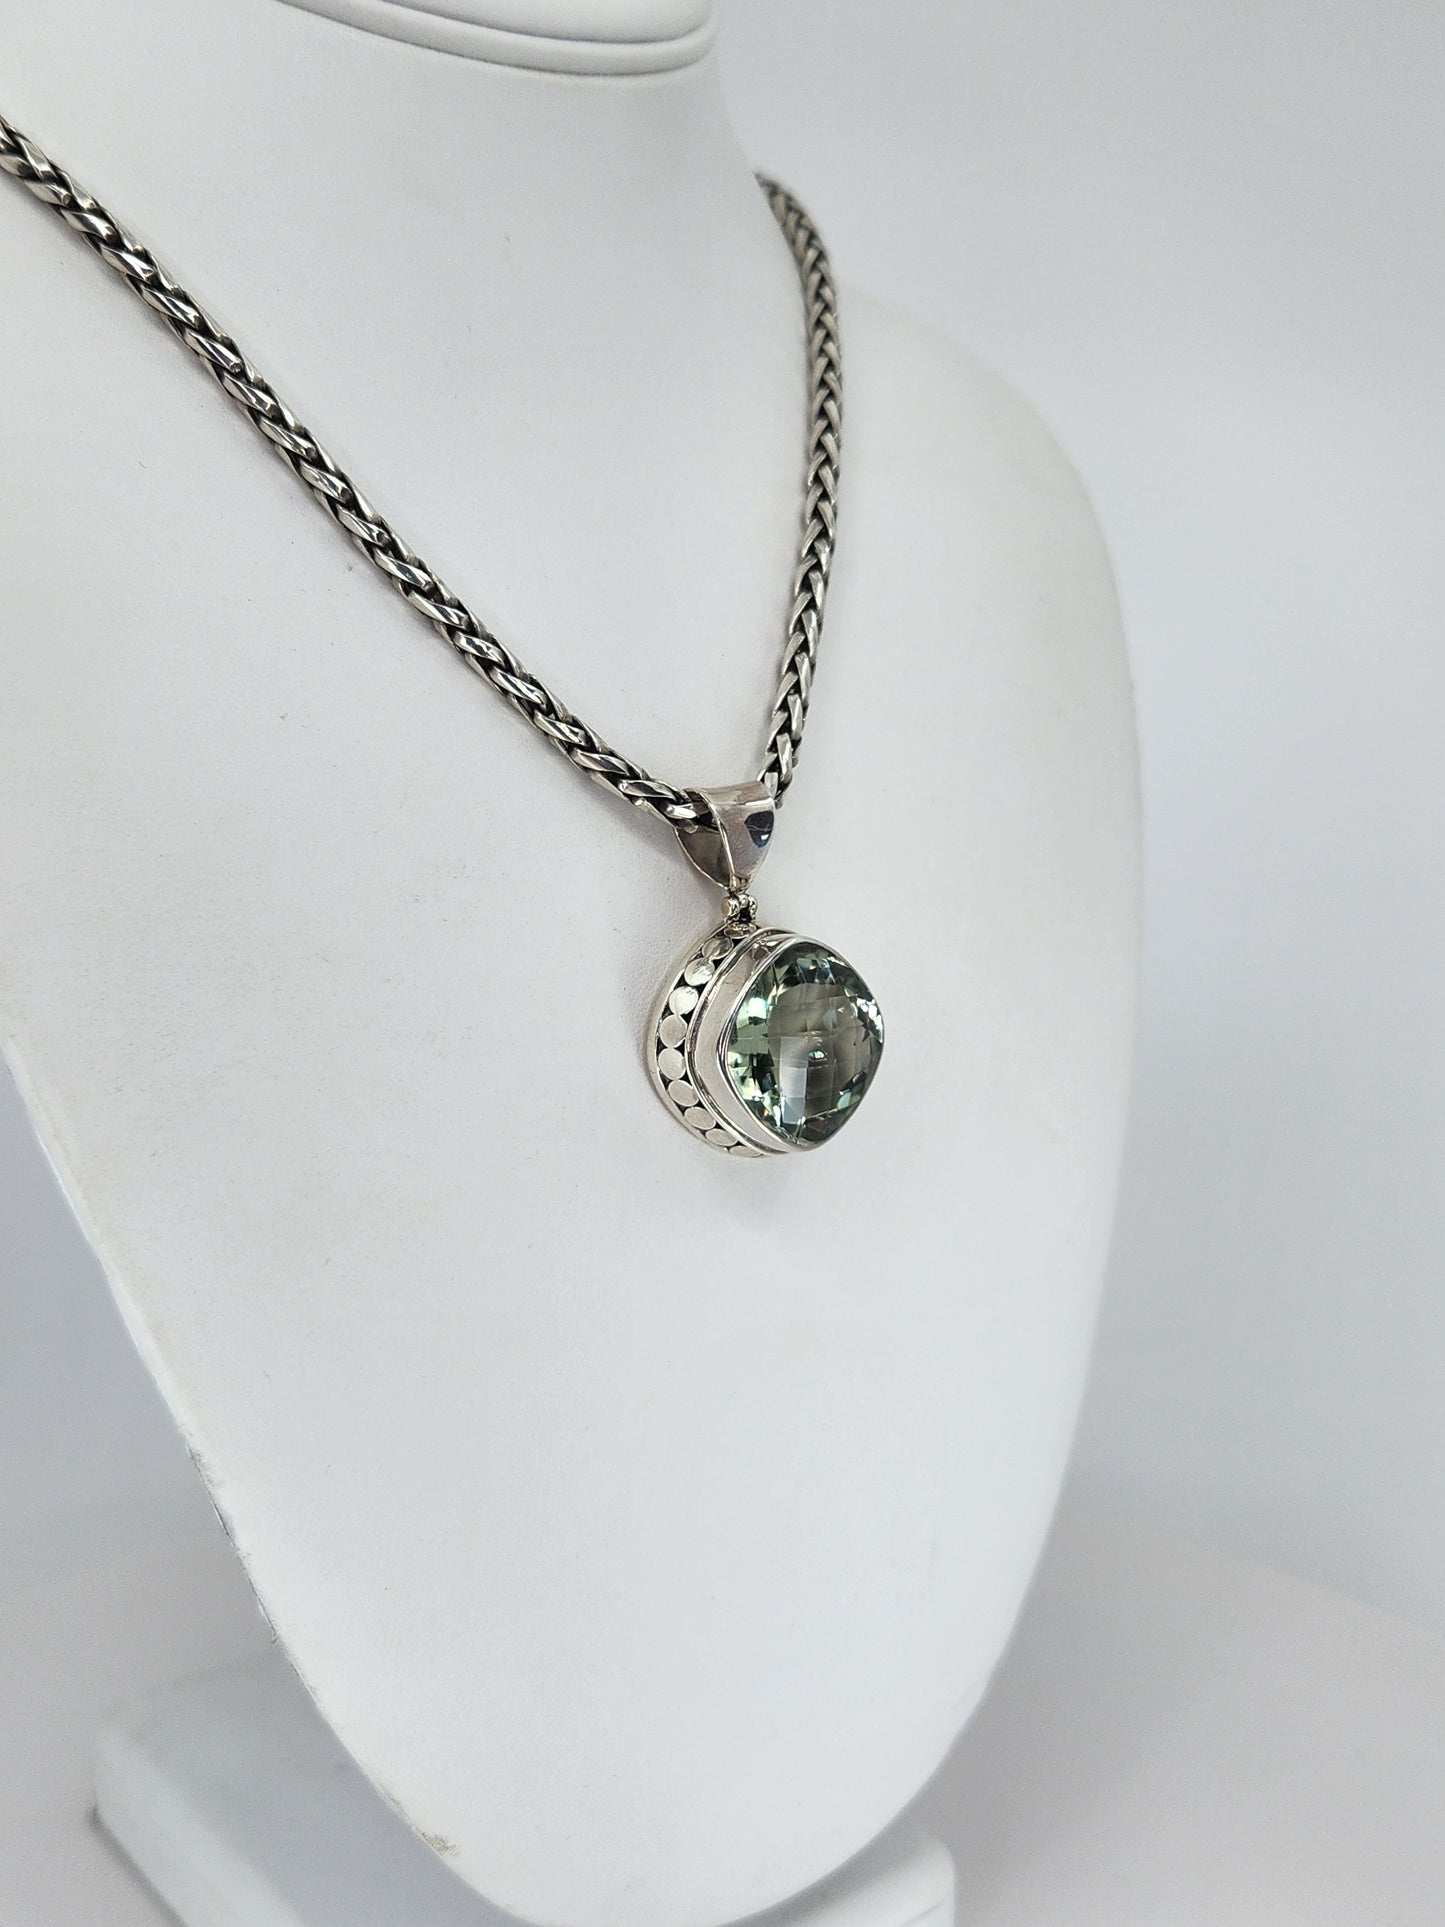 Janice Carson - Sterling Silver Necklace With 1 Inch Green Amethyst Pendant